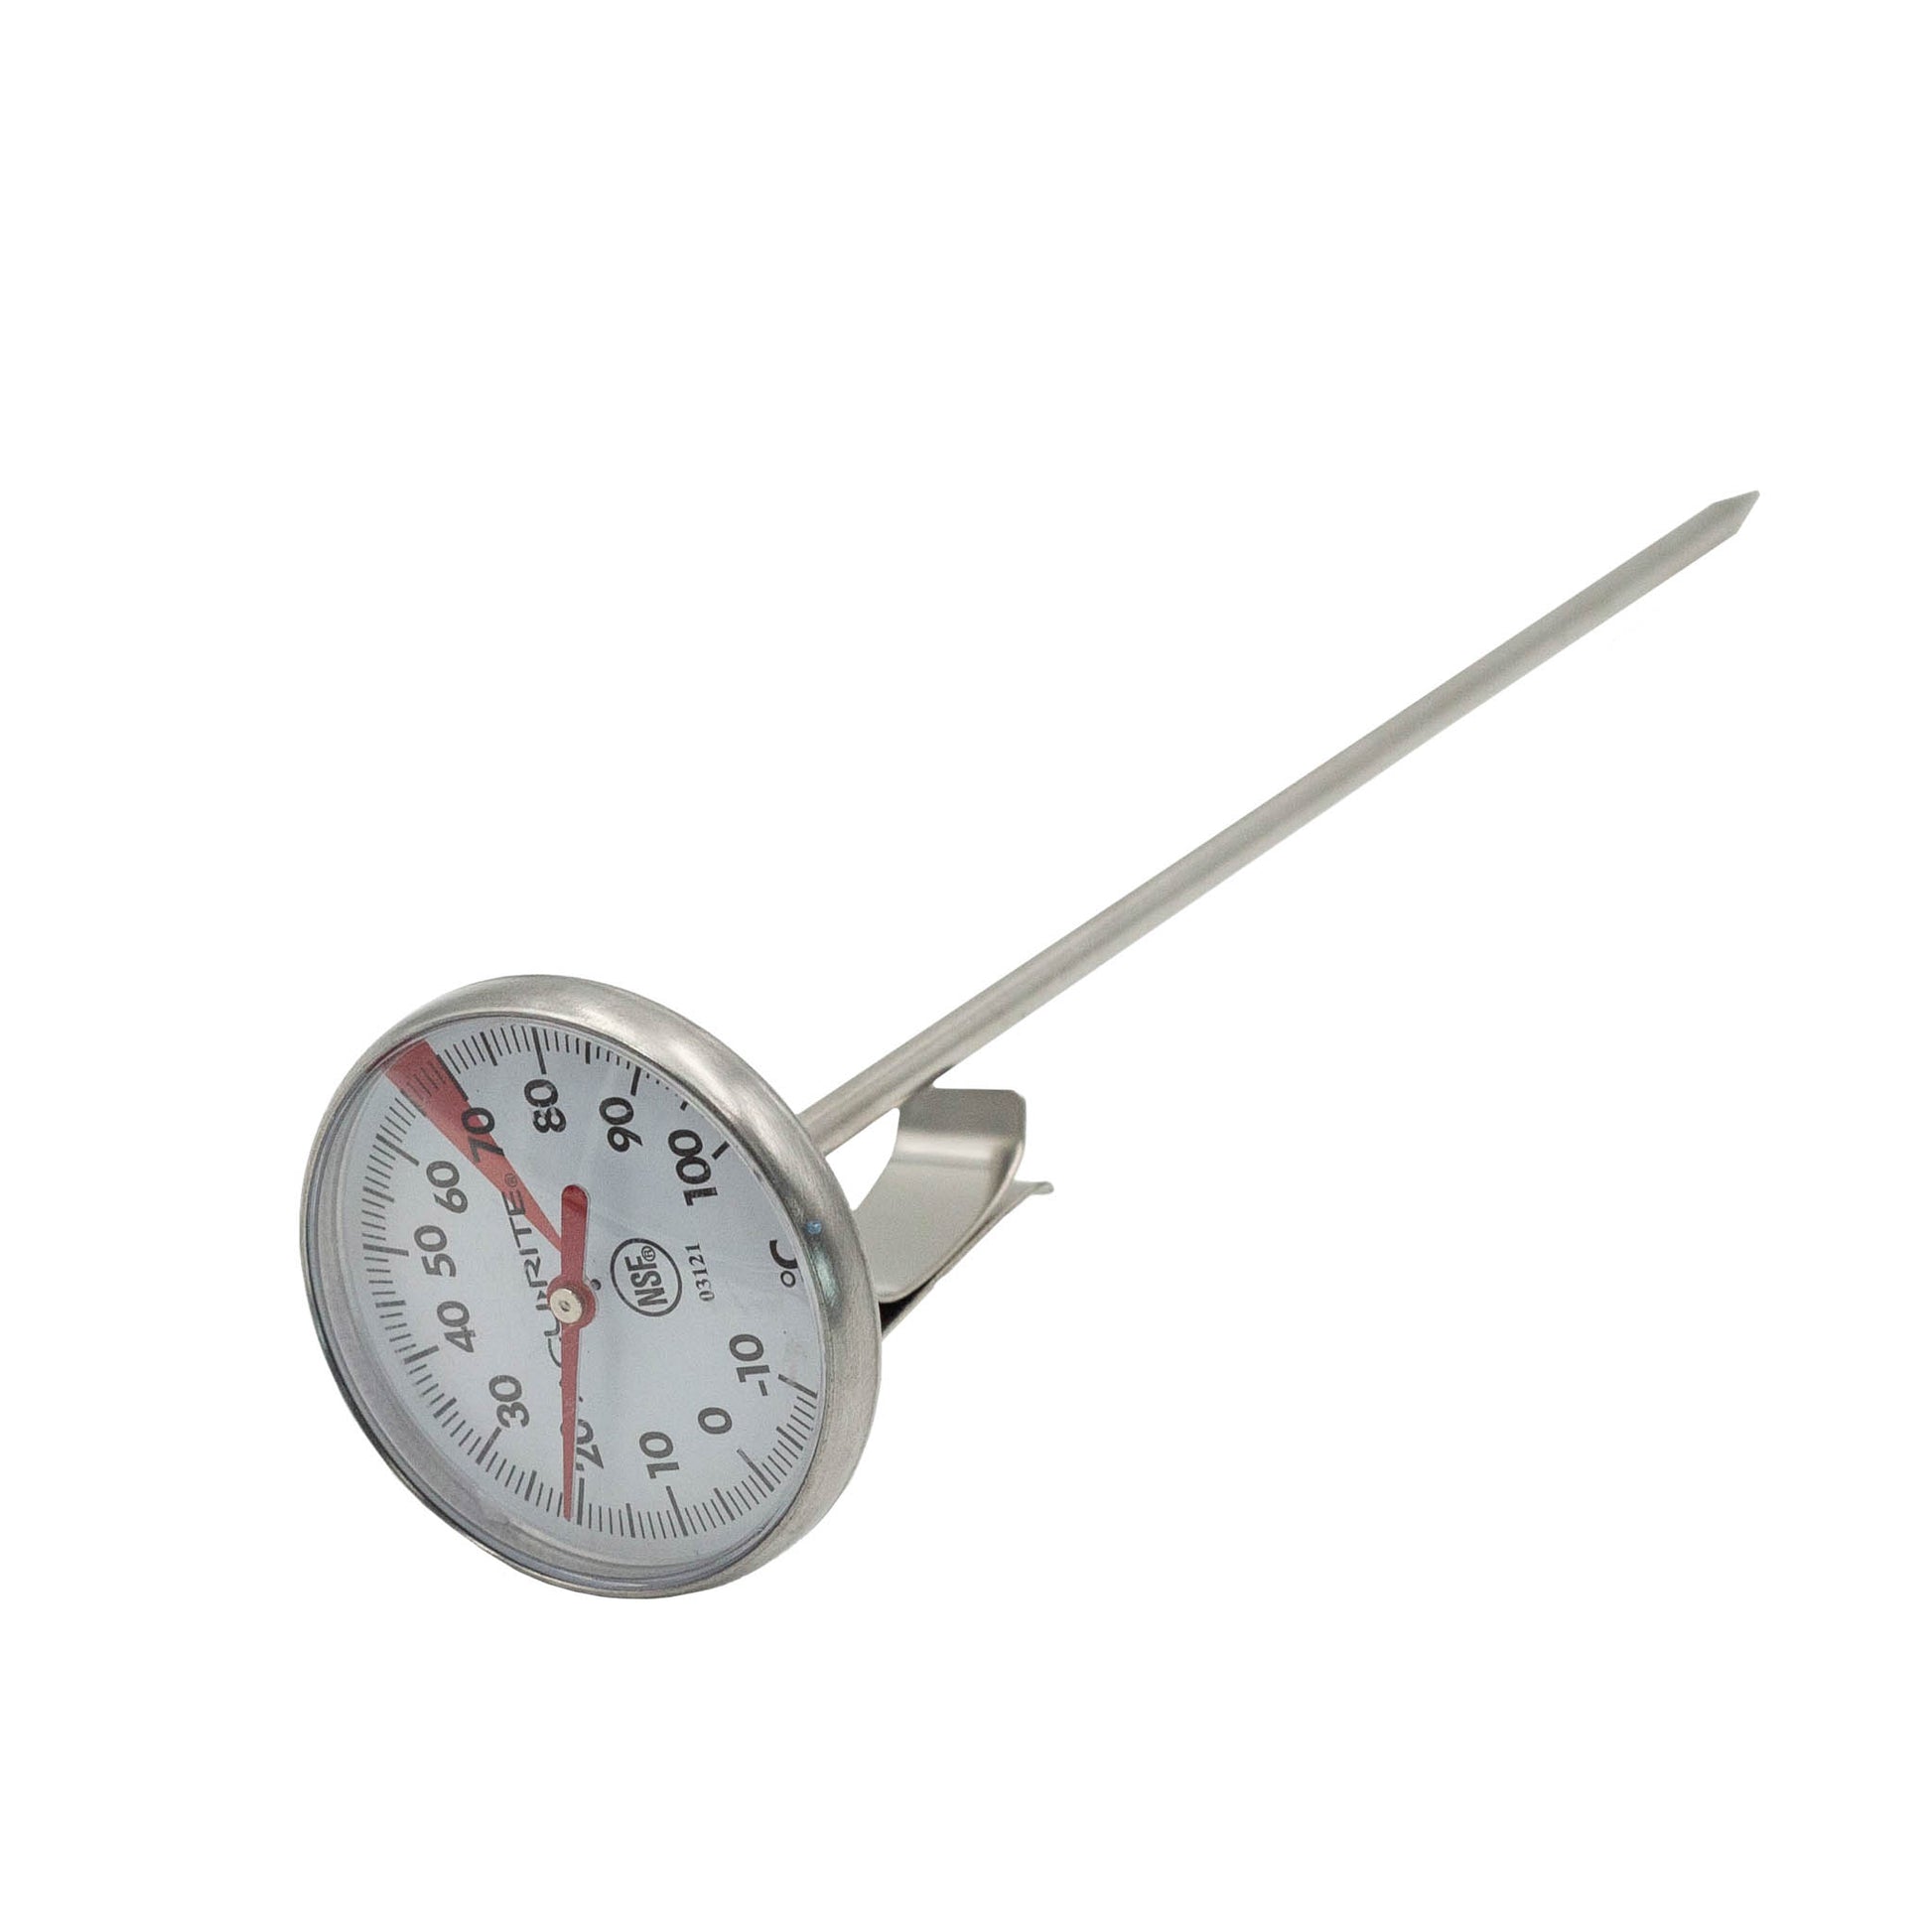 AcuRite Milk Frothing Thermometer